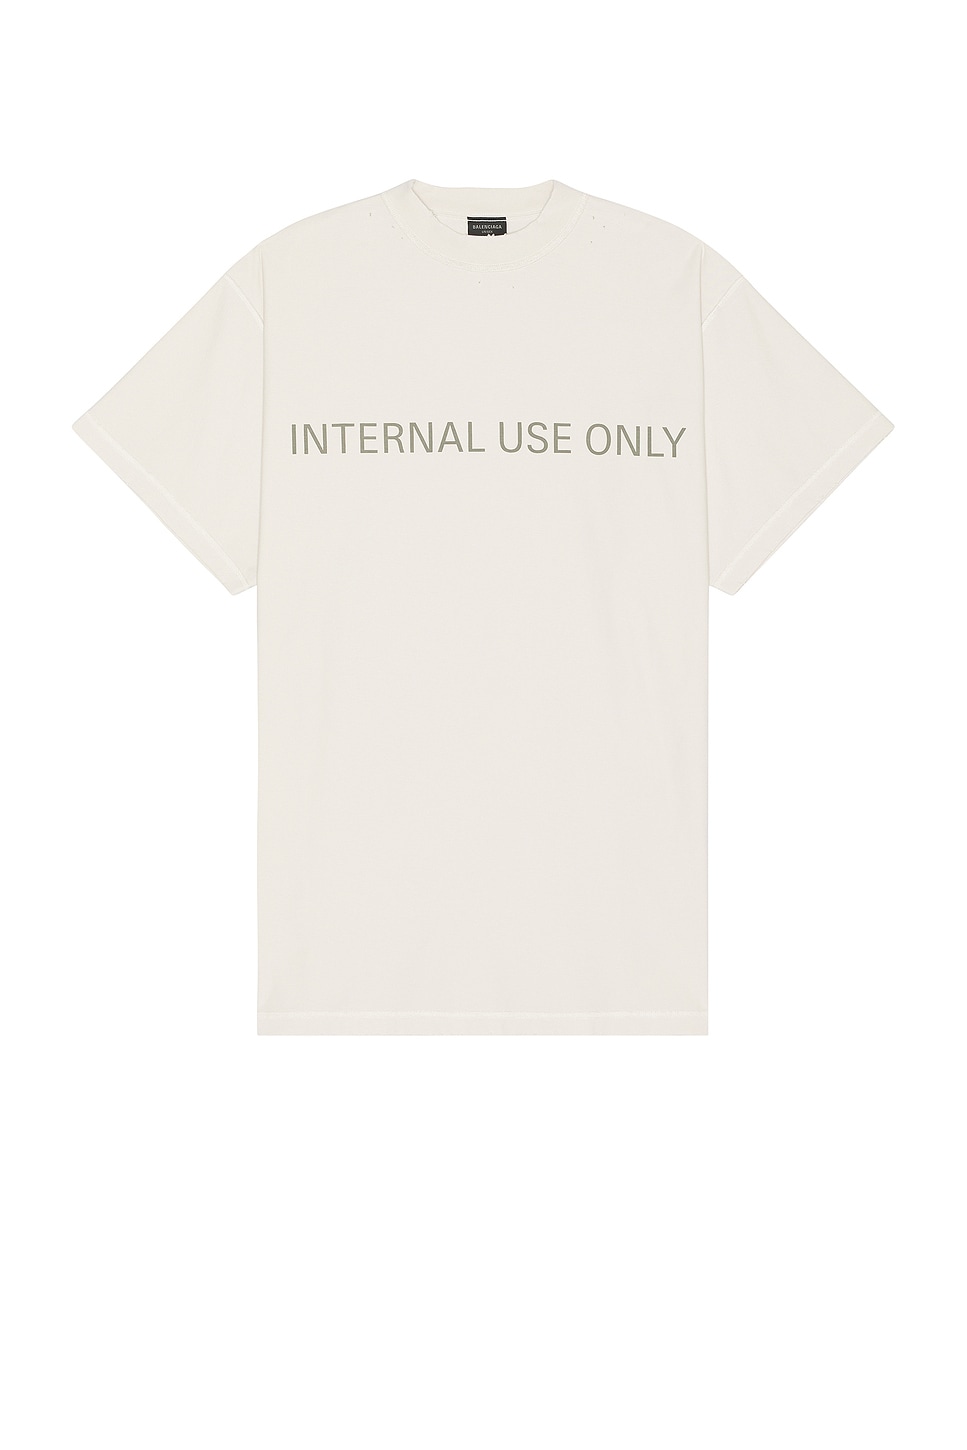 Image 1 of Balenciaga Inside Out T-Shirt in Off White